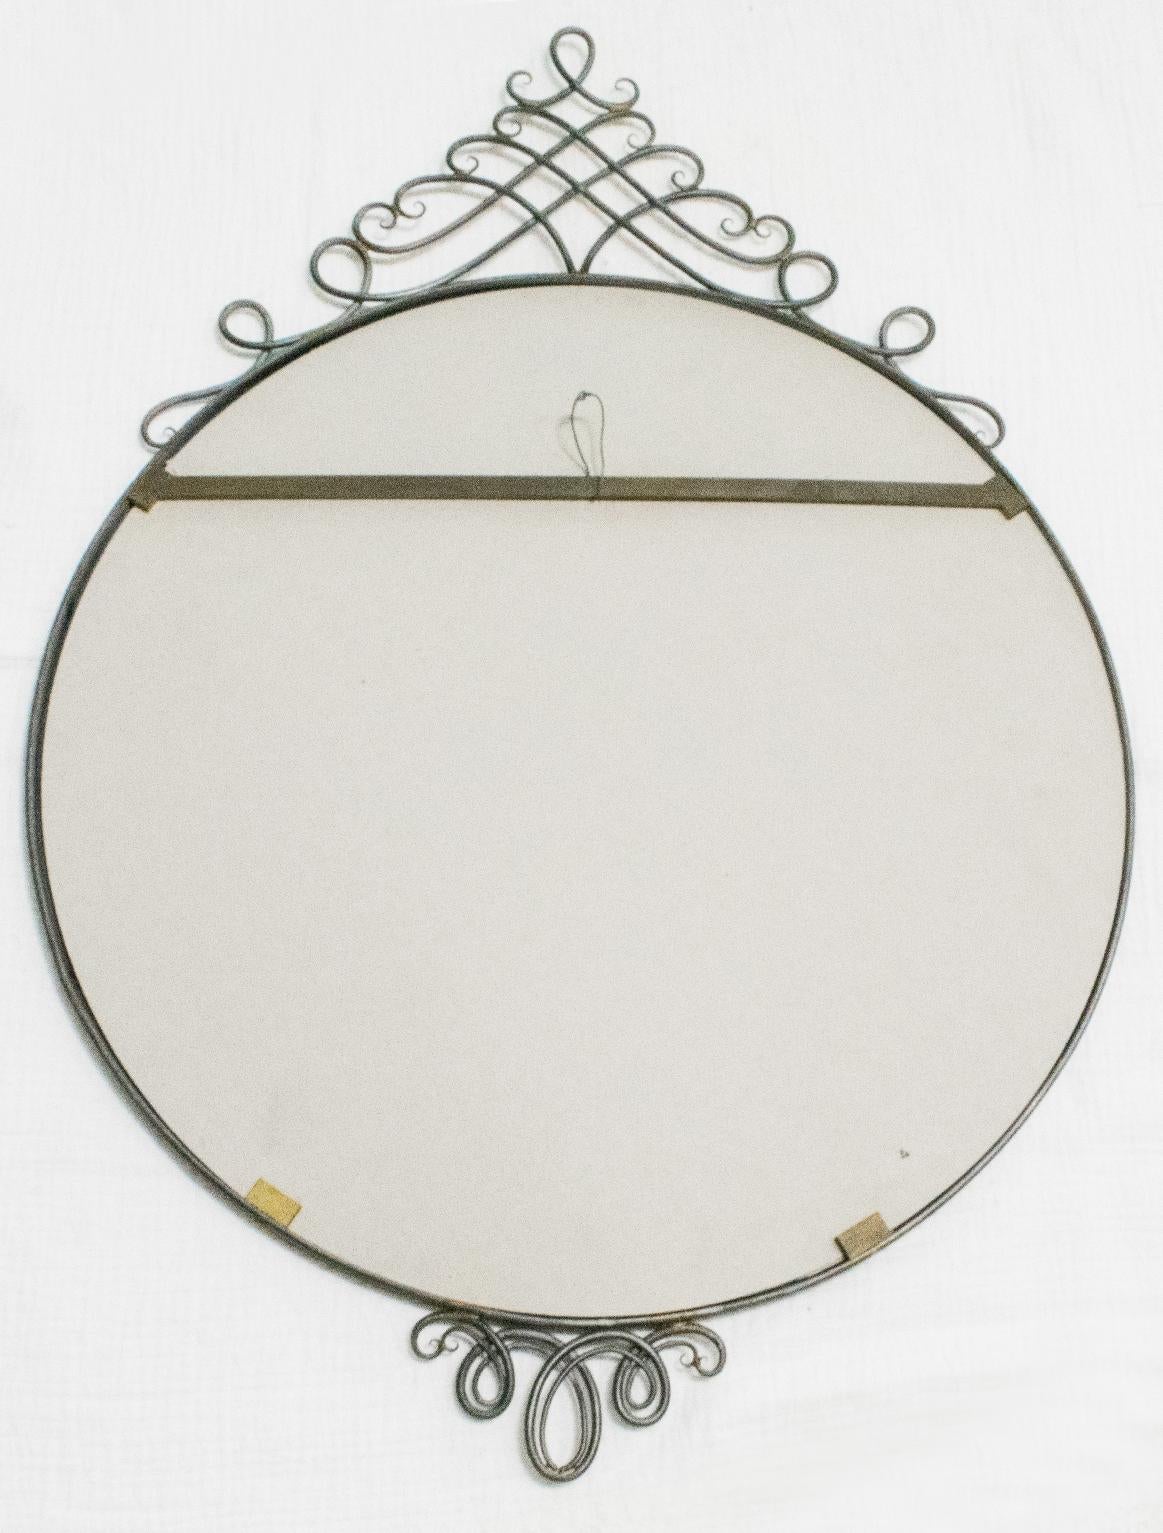 Metal Mid-Century Cast Iron Ornate Wall-Mounted Mirror, France 1950s For Sale